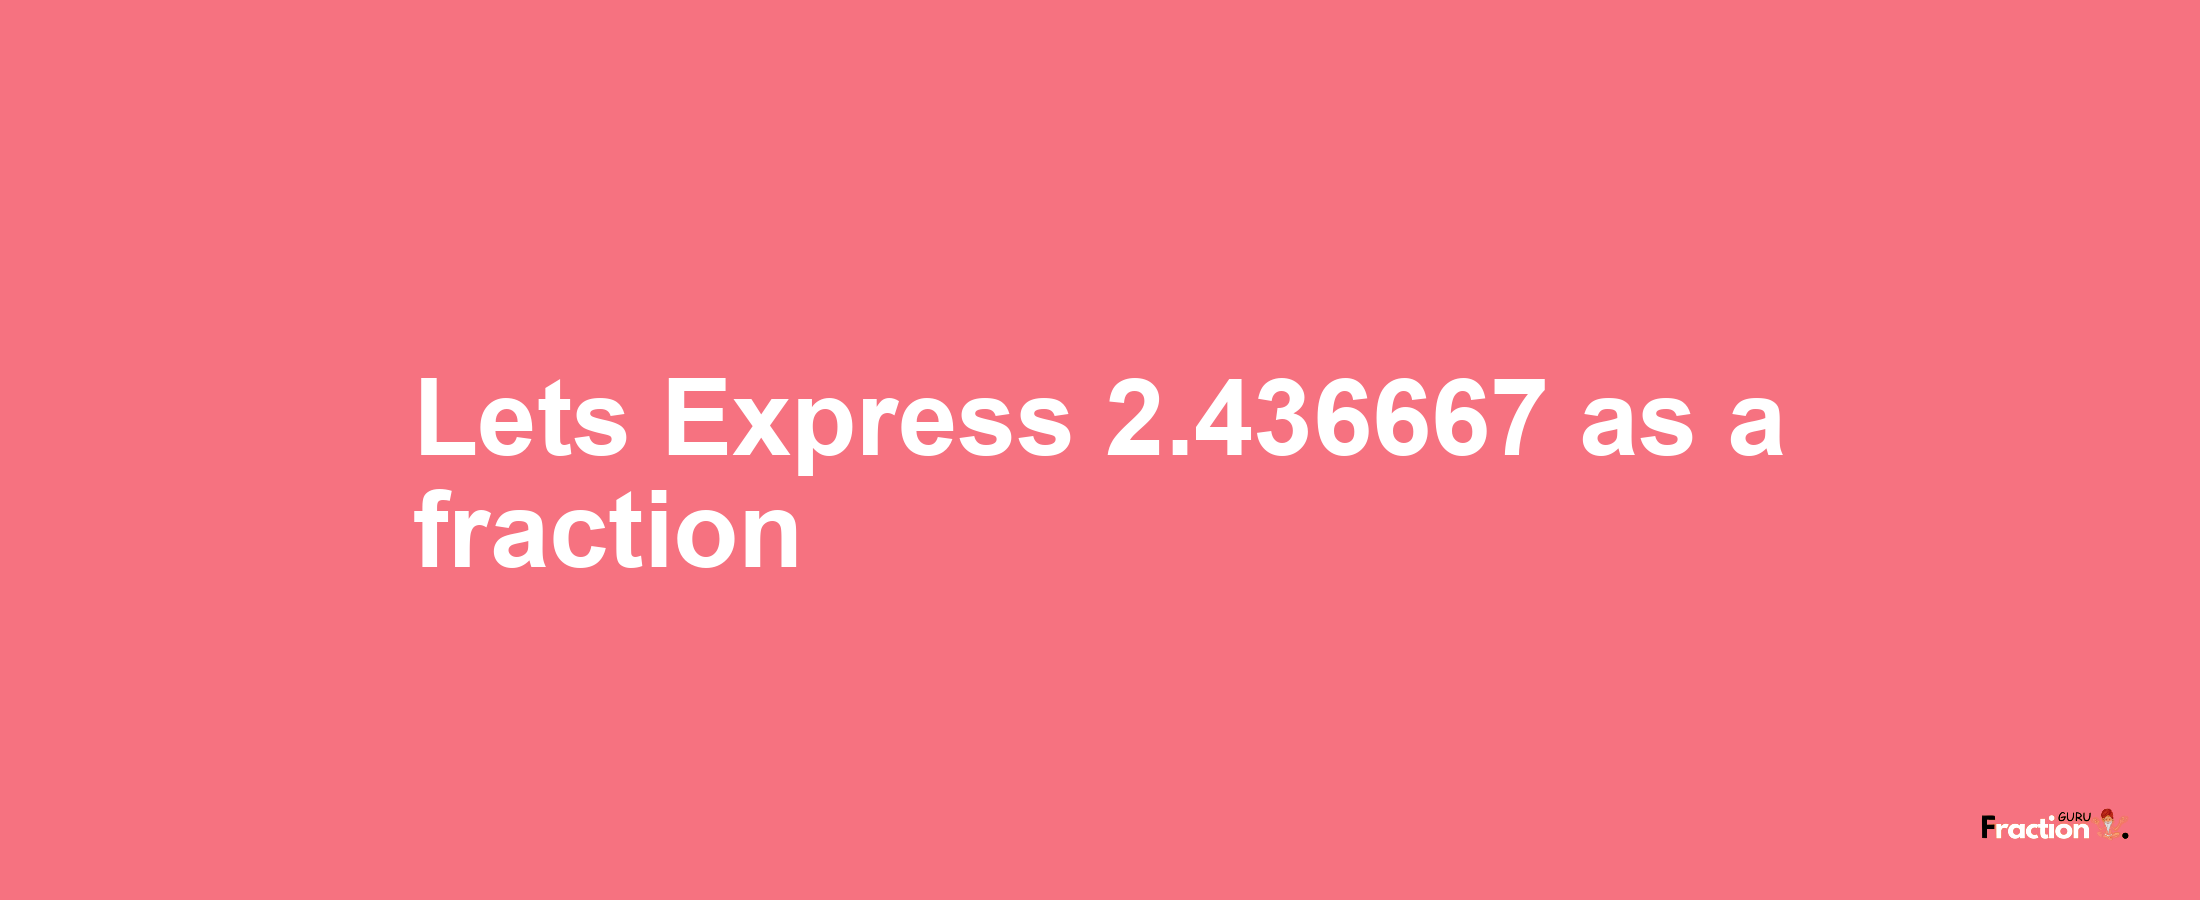 Lets Express 2.436667 as afraction